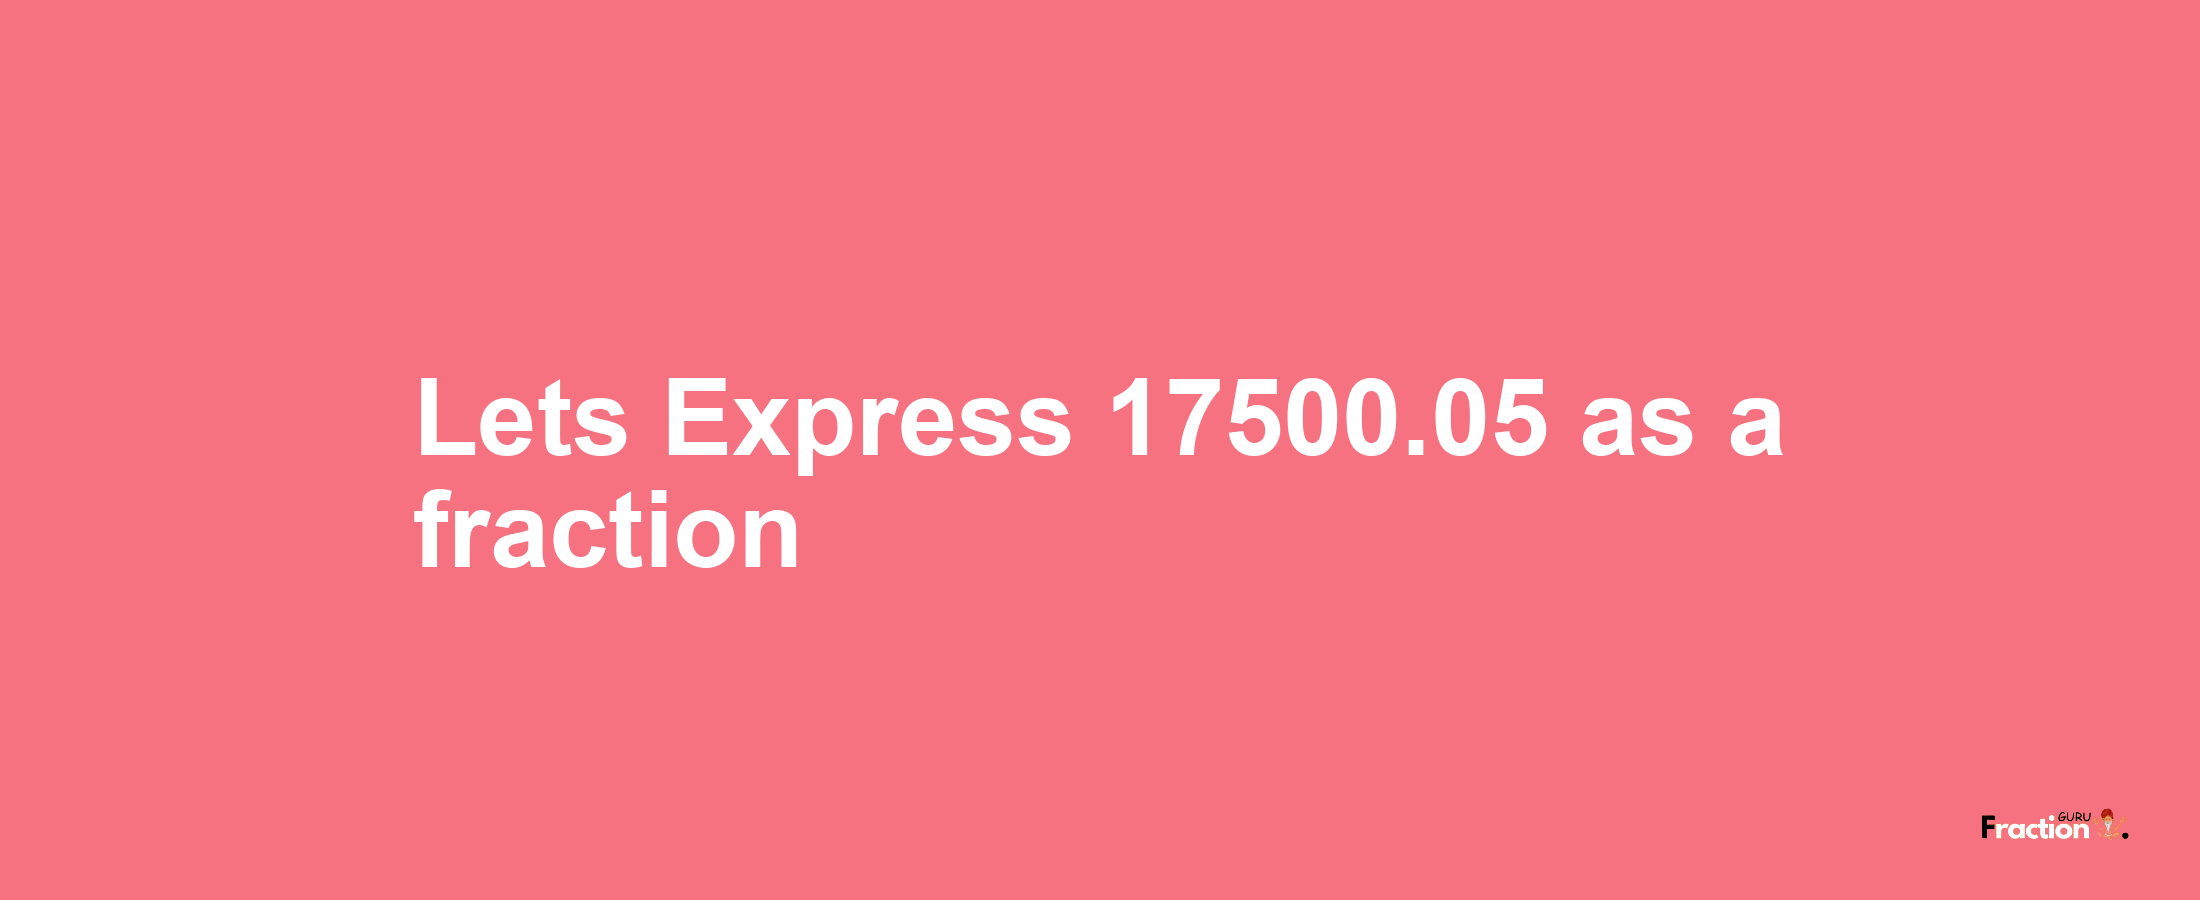 Lets Express 17500.05 as afraction